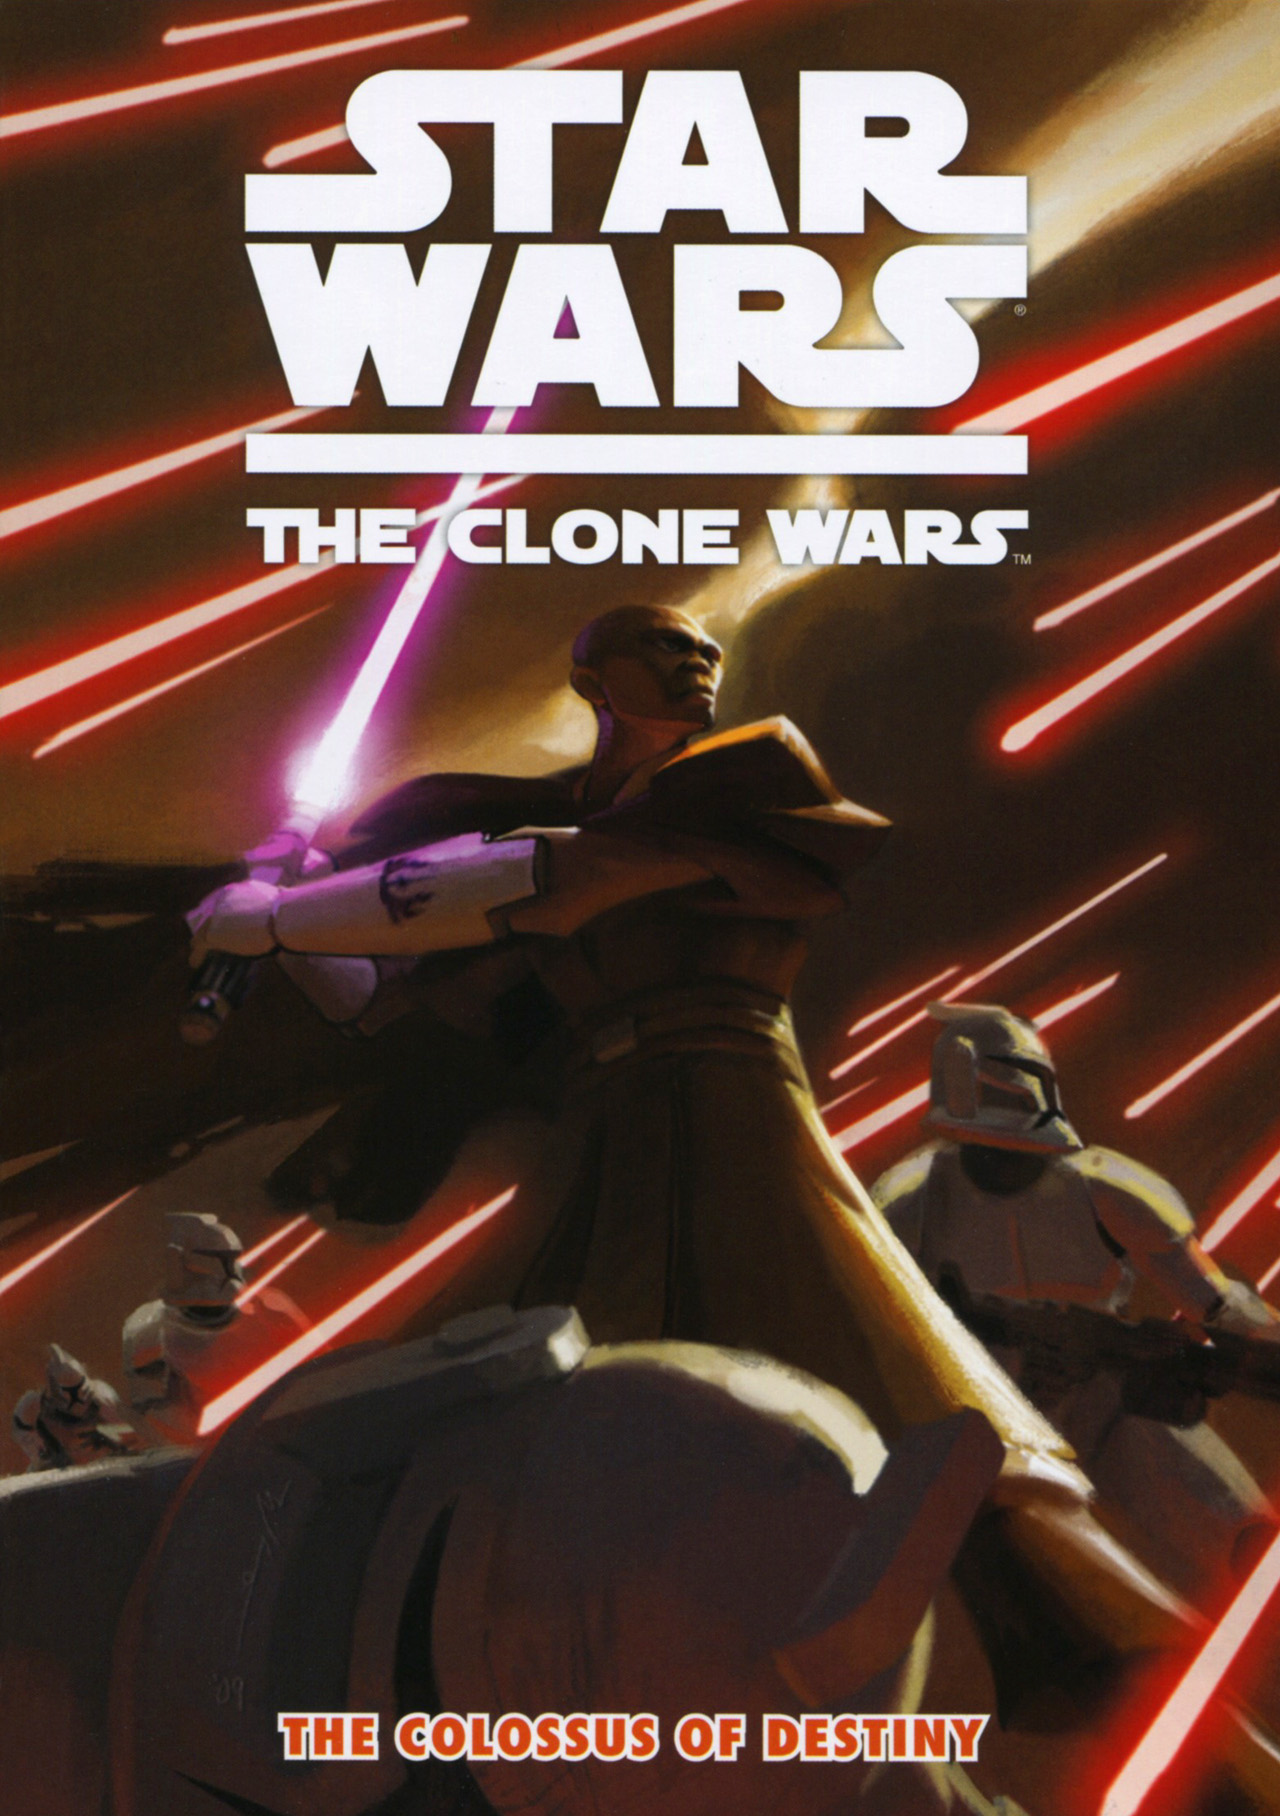 Read online Star Wars: The Clone Wars - The Colossus of Destiny comic -  Issue # Full - 1